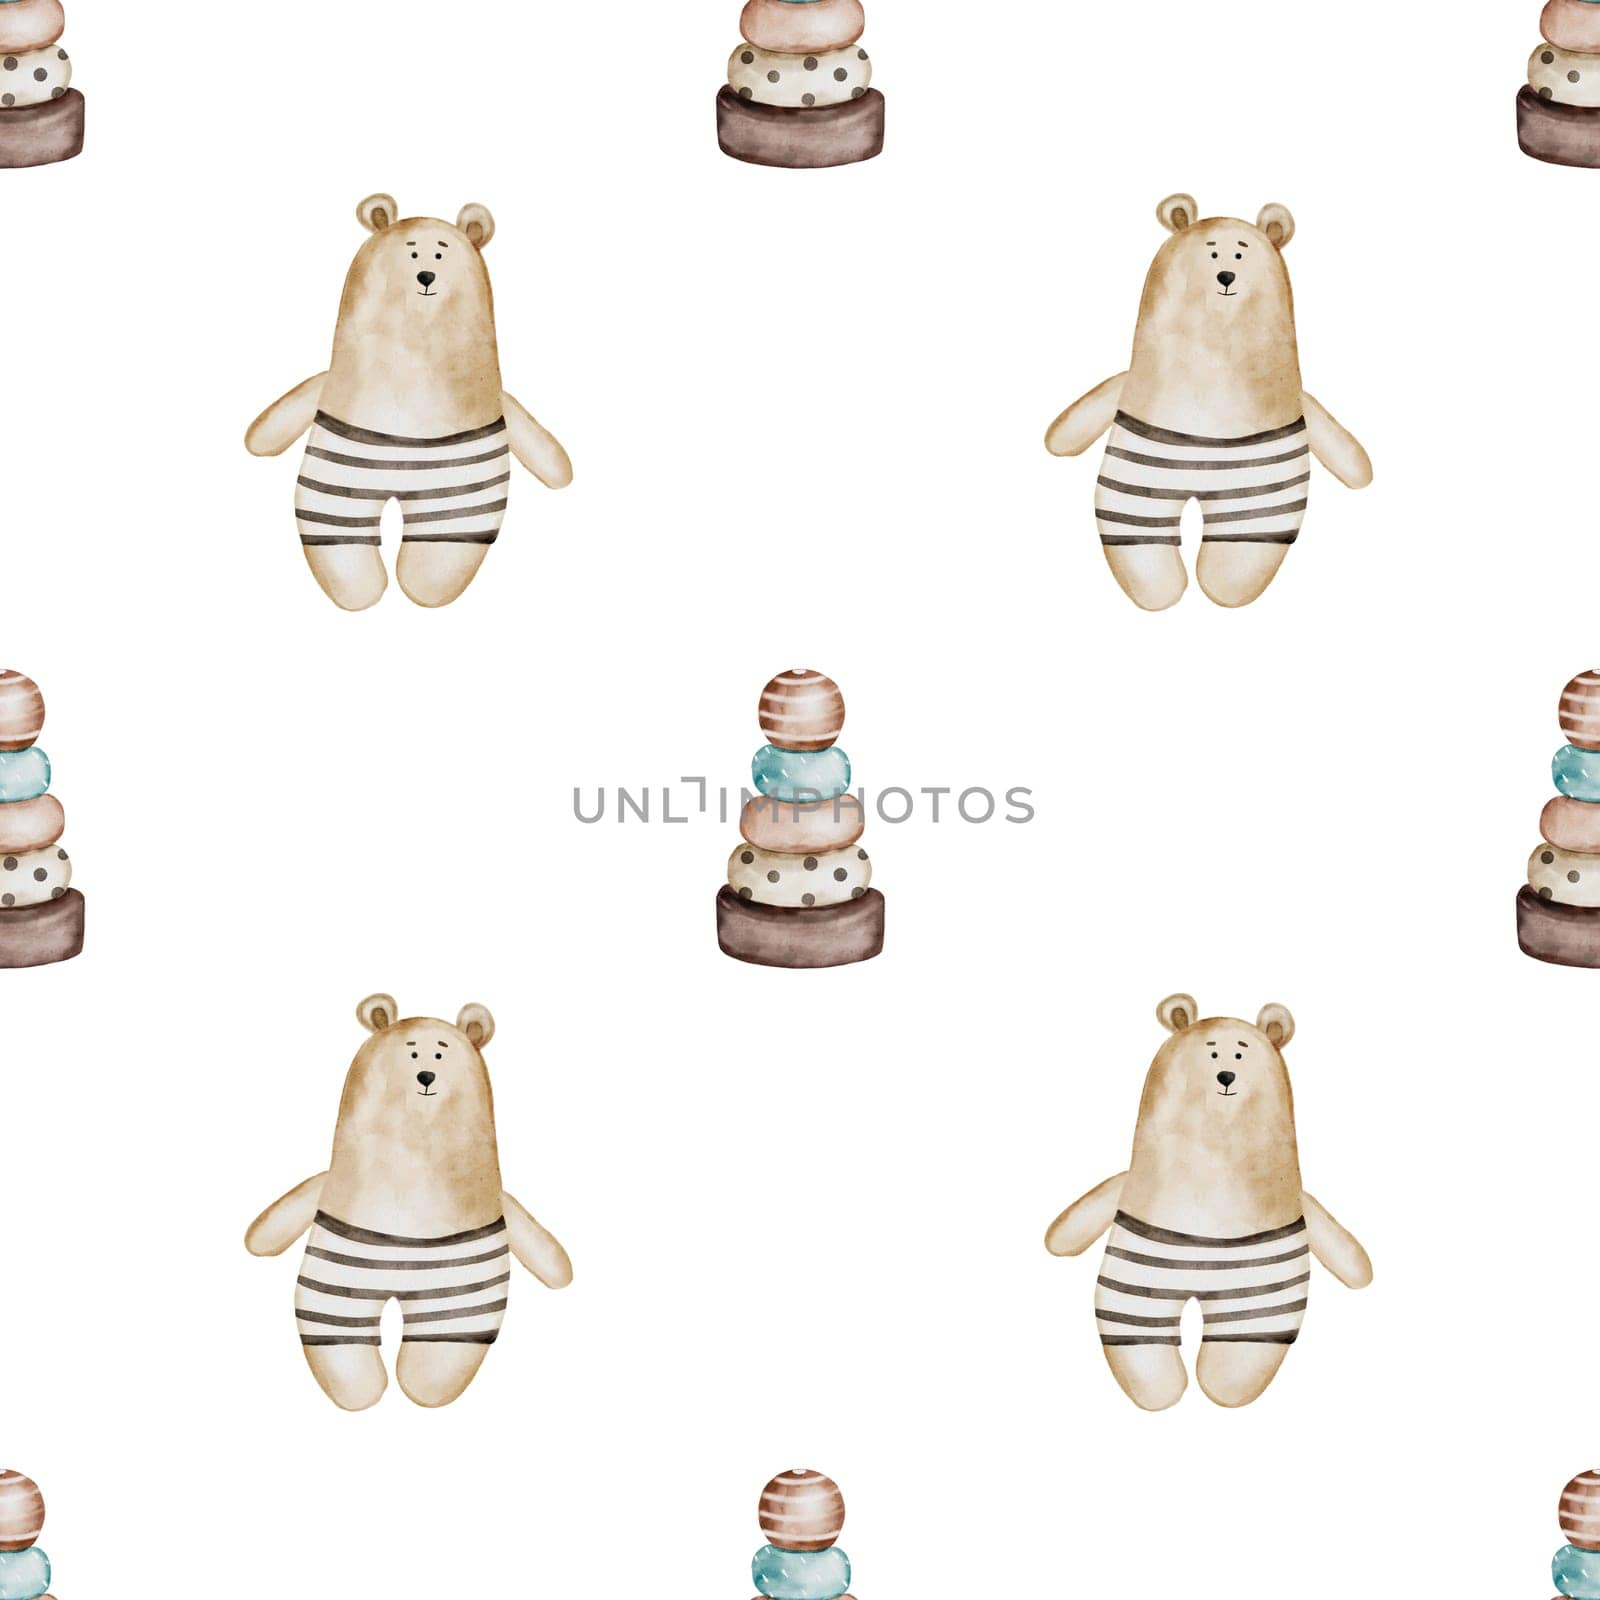 Baby pattern with retro toys. Watercolor ornament with vintage bear and wooden pyramid. In pastel colors on a white background. Baby design for diapers, bed linen, clothes. High quality illustration